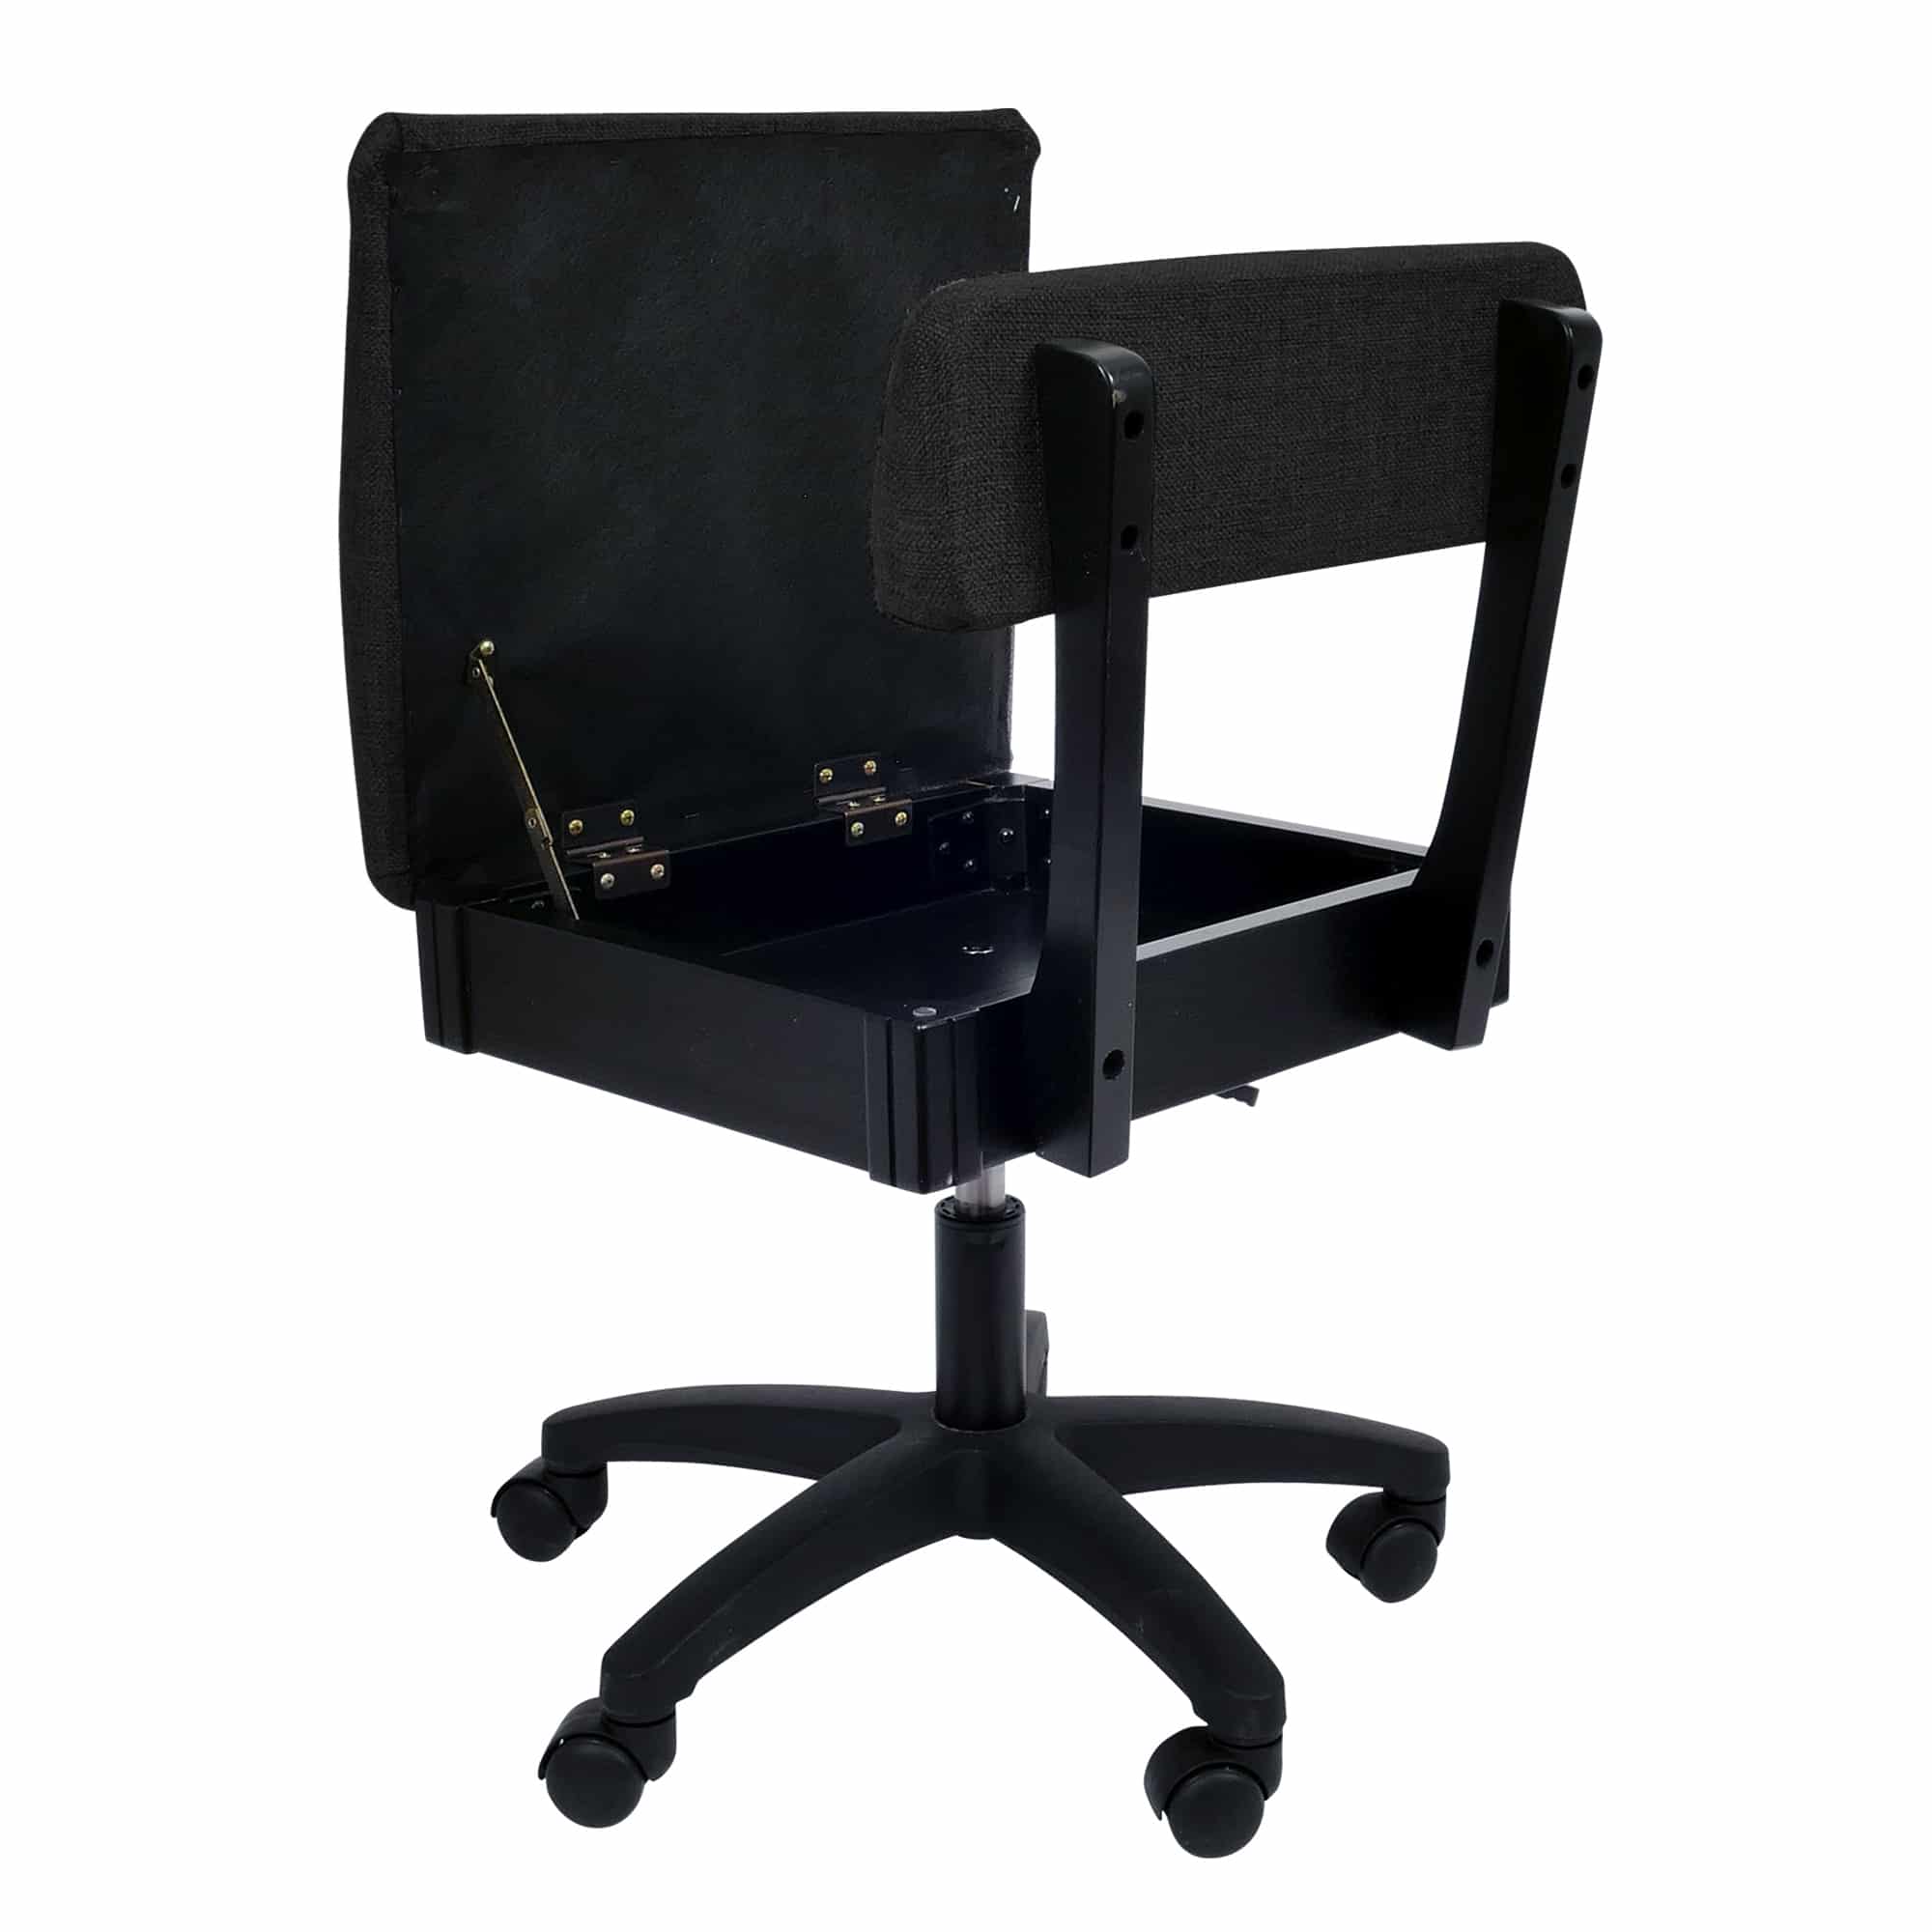 The Baroness Black Hydraulic Sewing Chair is designed to sew ergonomically, and the seat’s secret storage compartment is perfect for stashing notions or an emergency jewel-encrusted dagger.